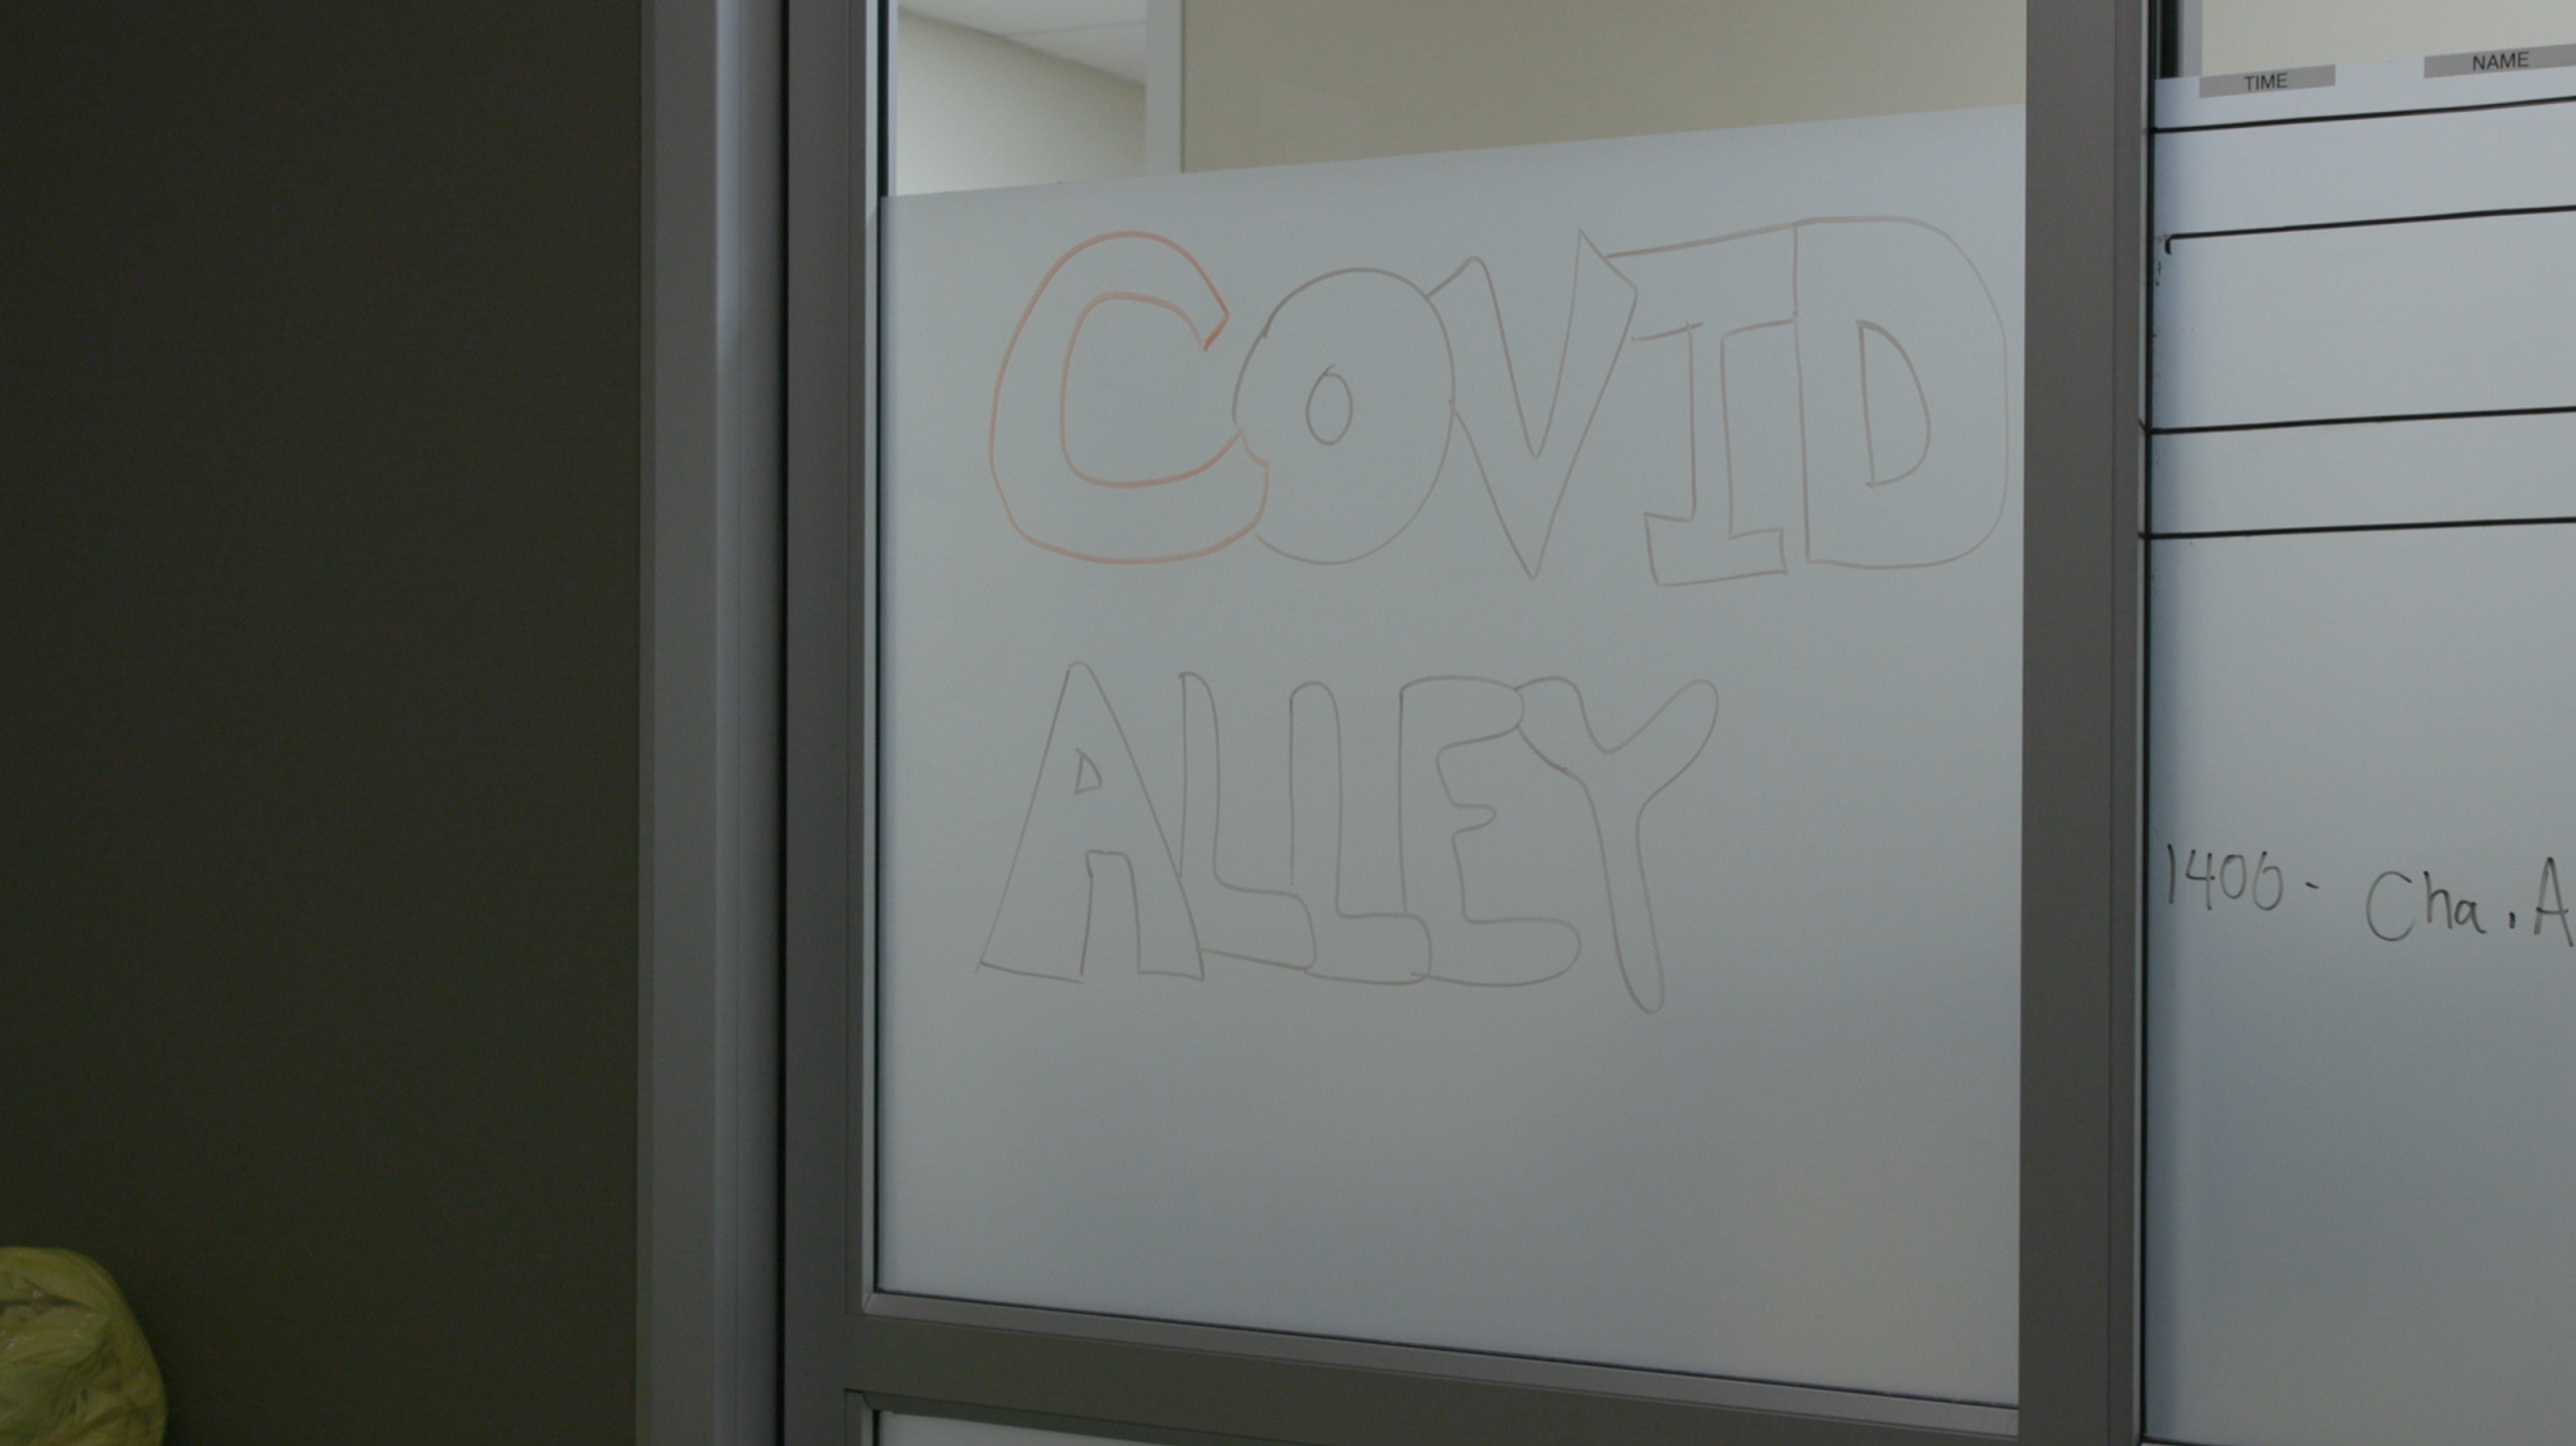 A glass door with "COVID Alley" written in dry erase marker